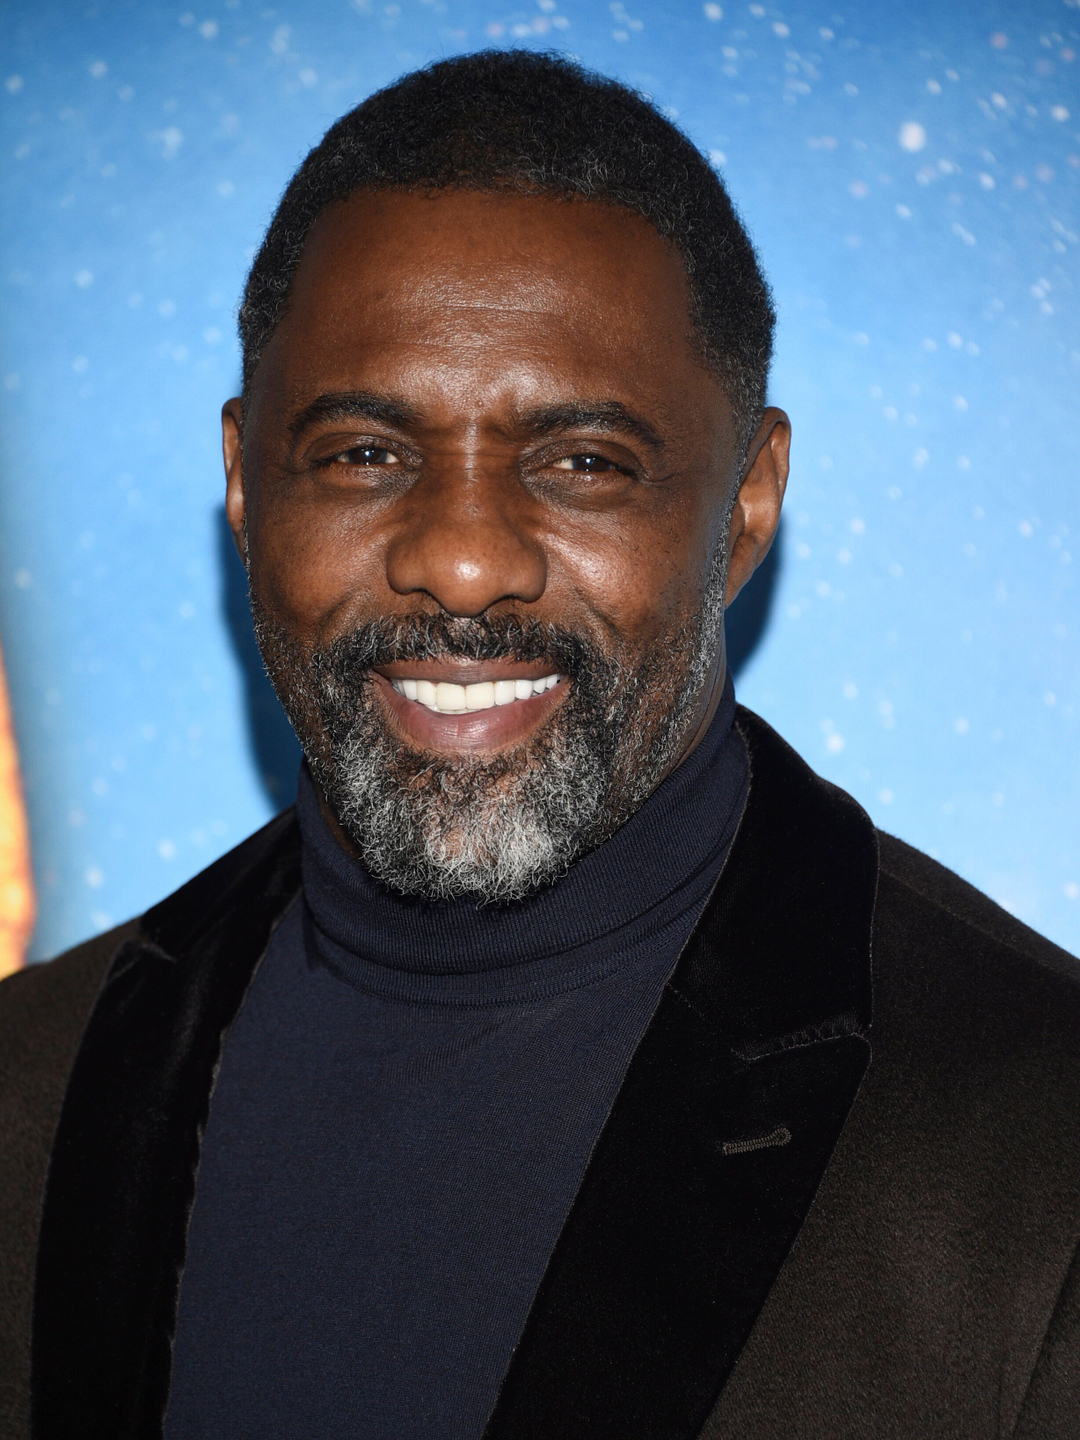 Idris Elba does he have a wife